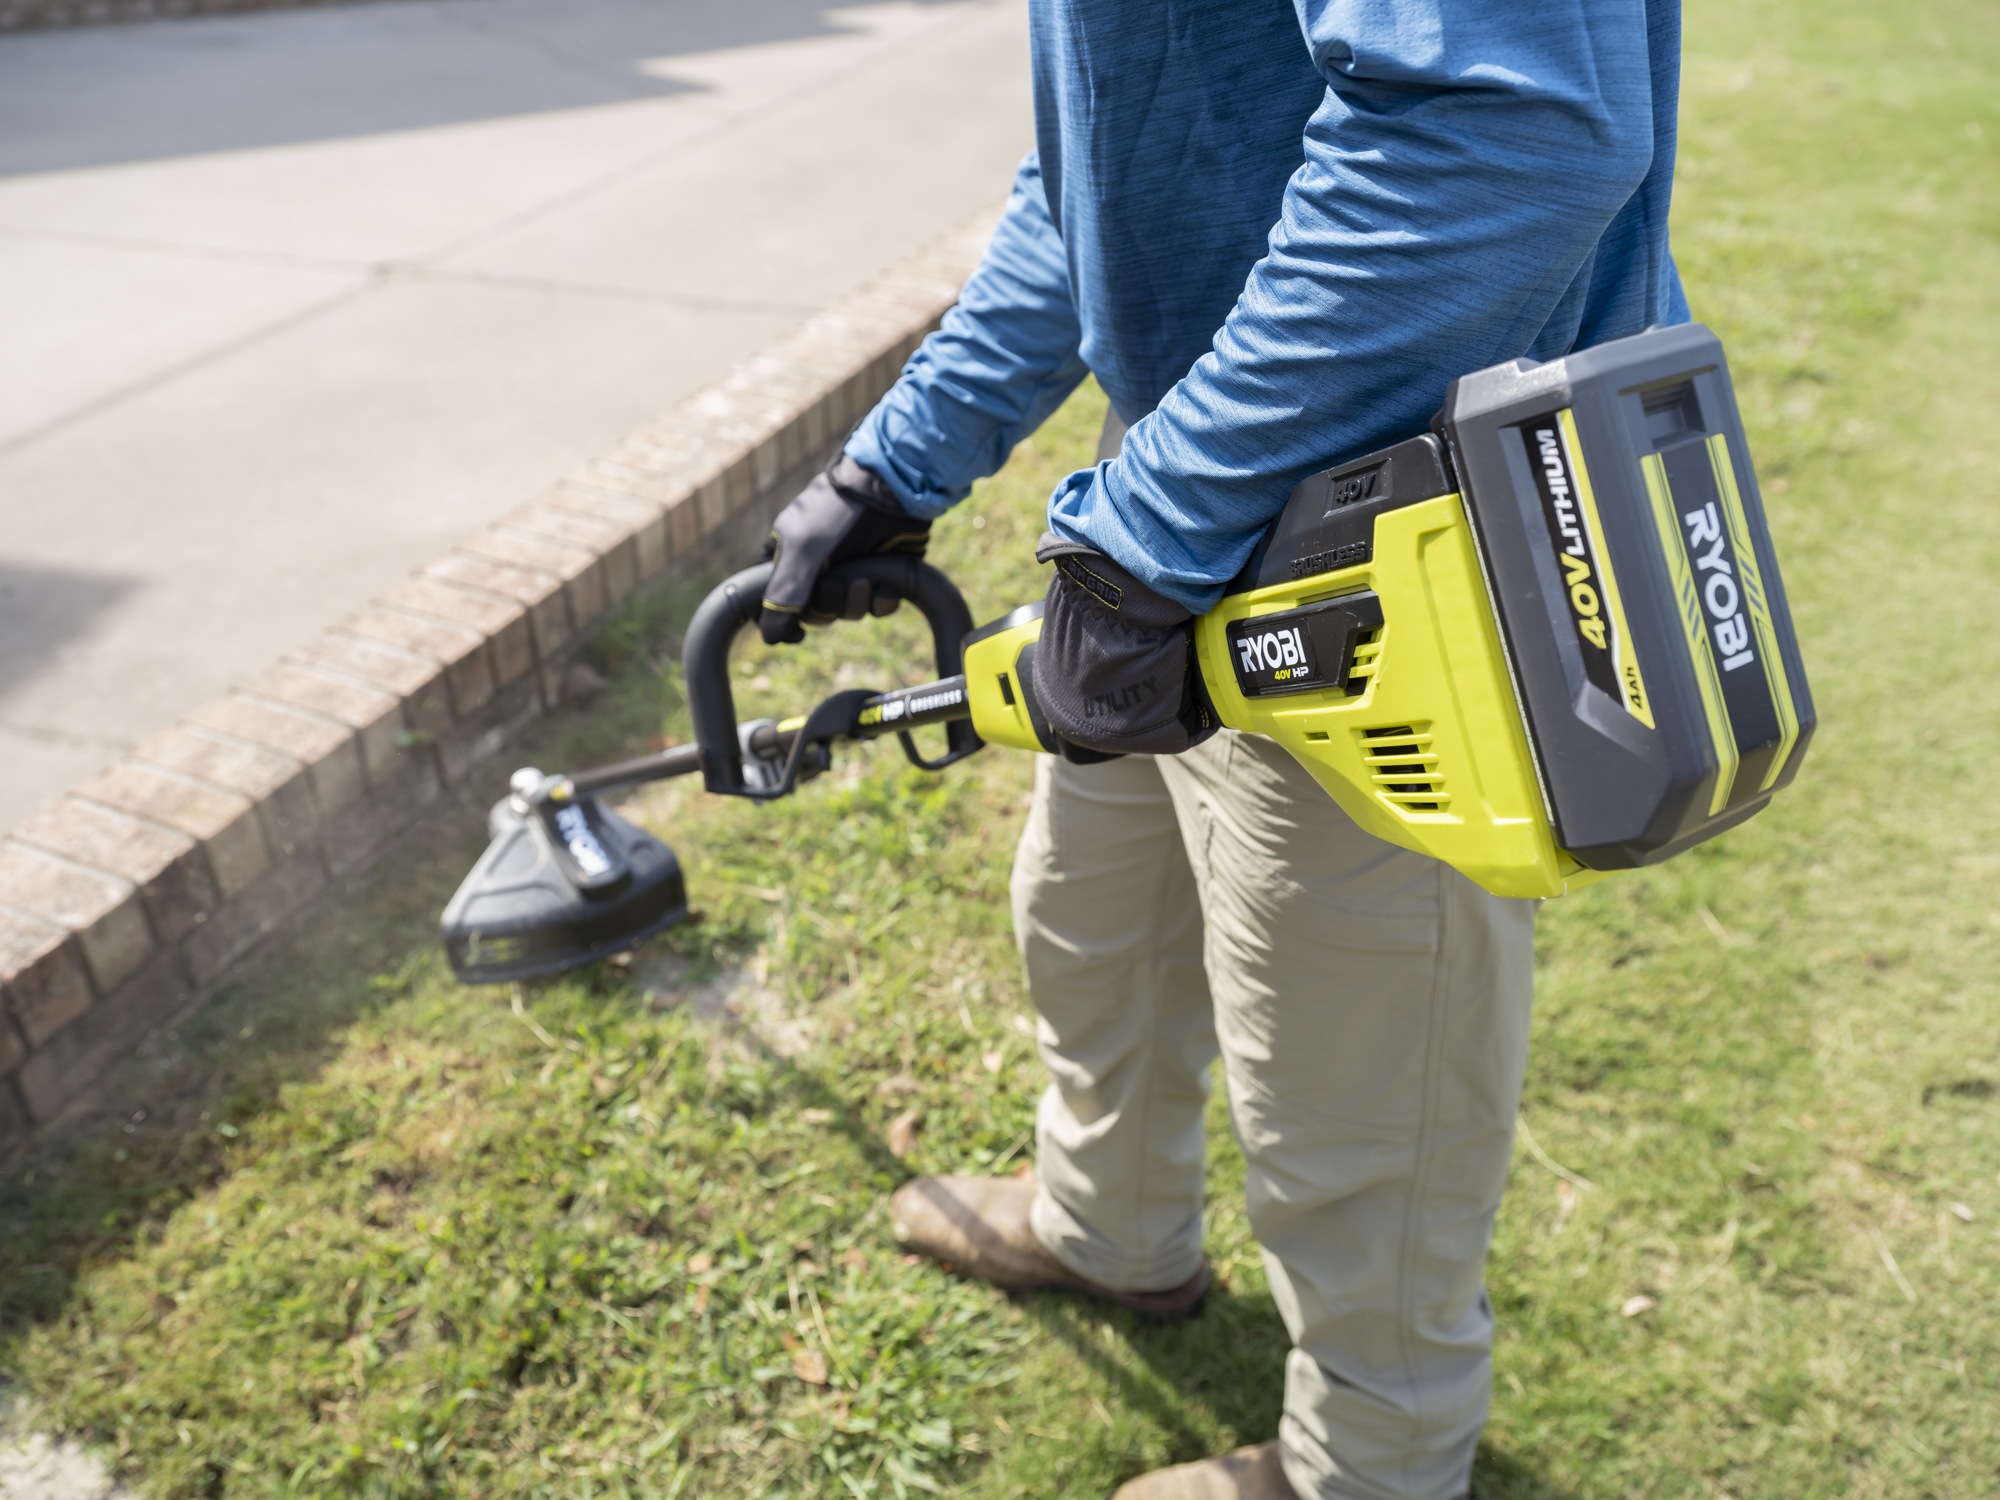 Attachment Capability Transforms your String Trimmer into a Variety of Tools